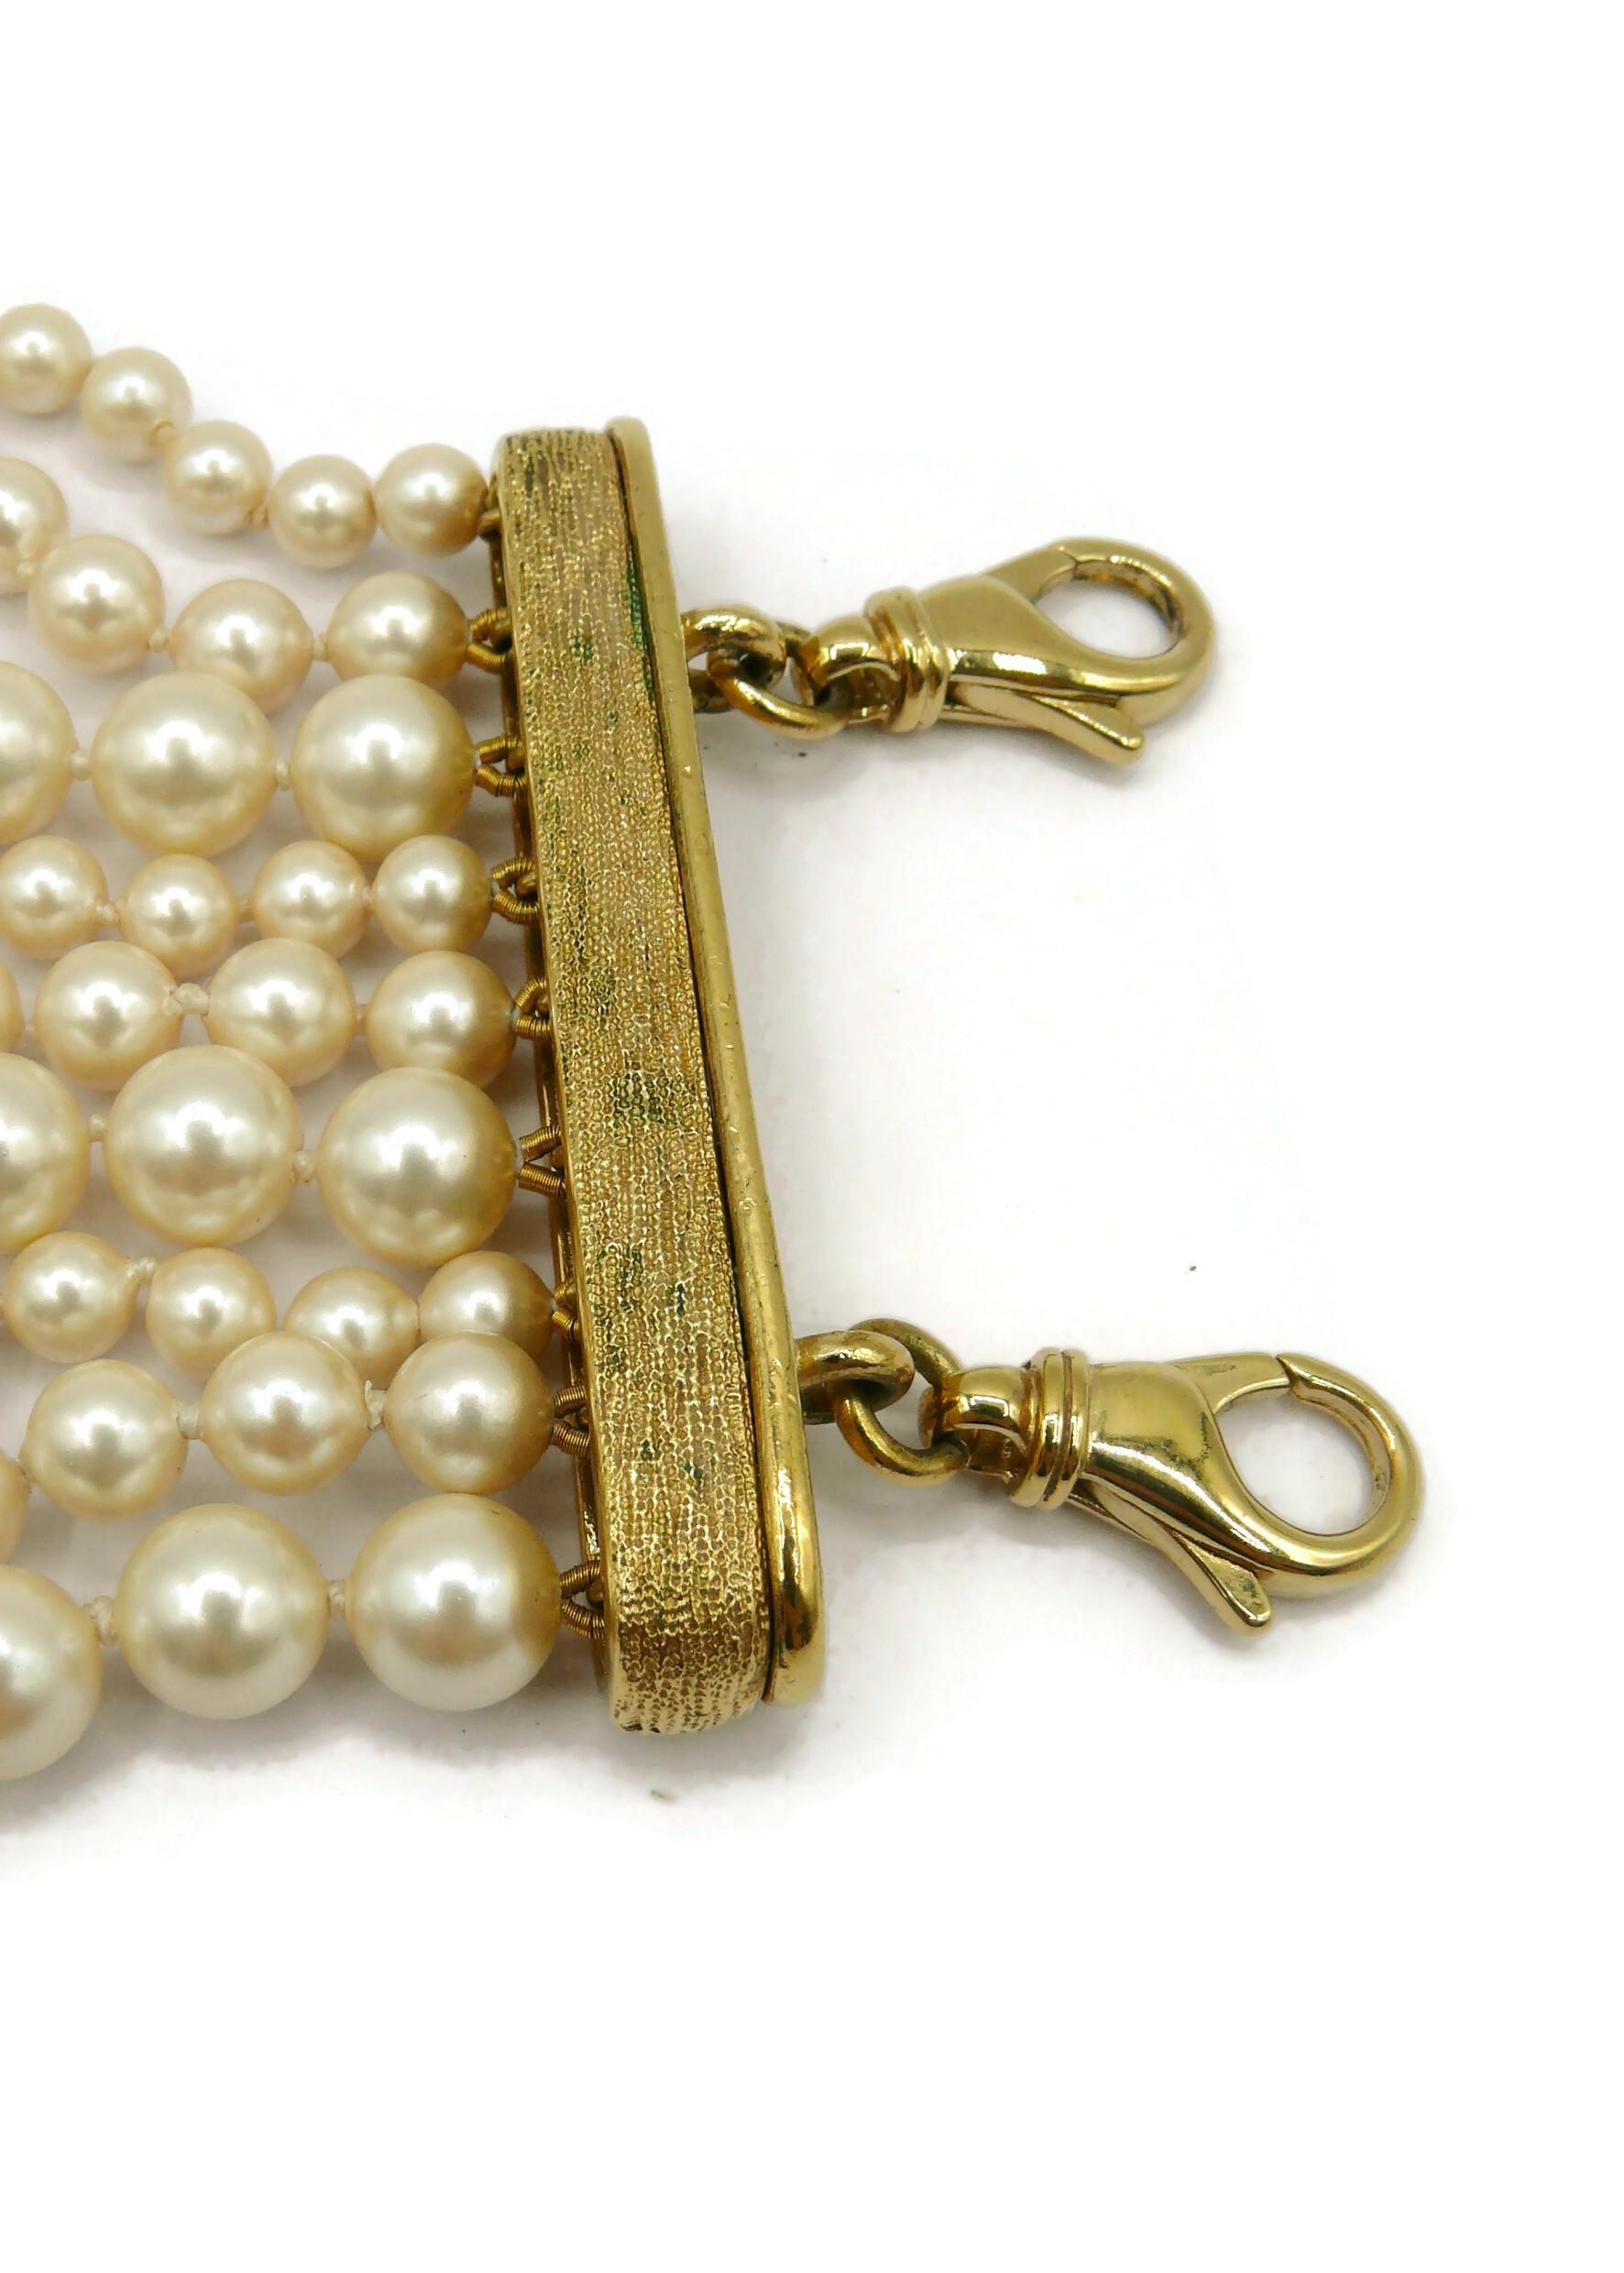 CHRISTIAN DIOR Vintage Multi-Strand Faux Pearl Necklace For Sale 10